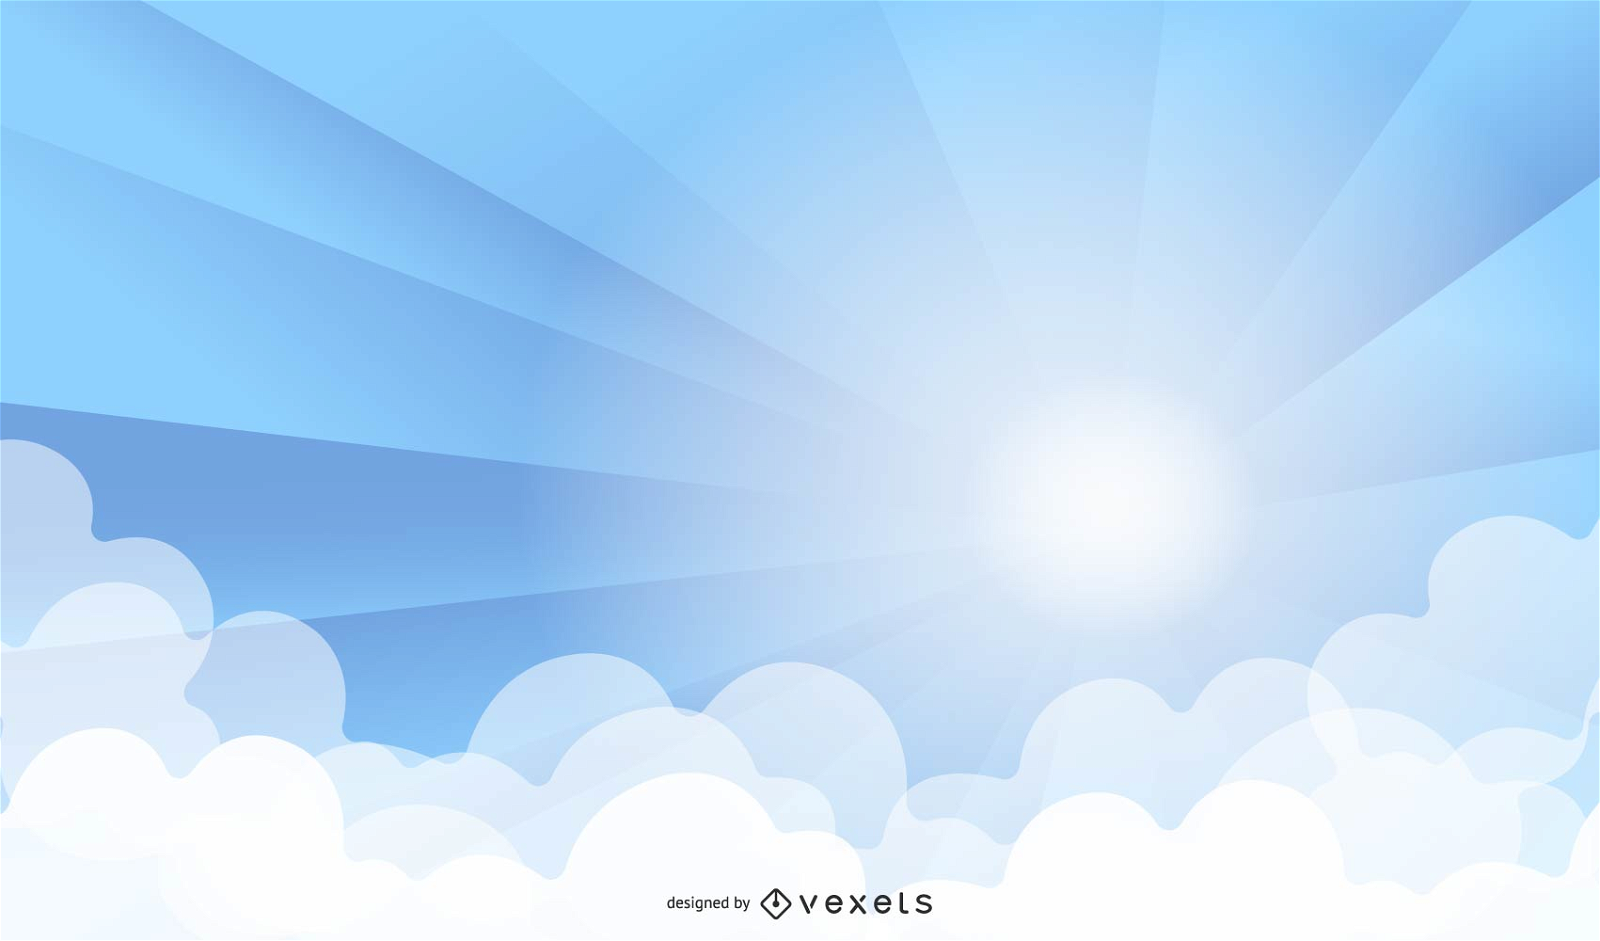 Sun Burst With Rays Form Clouds Vector